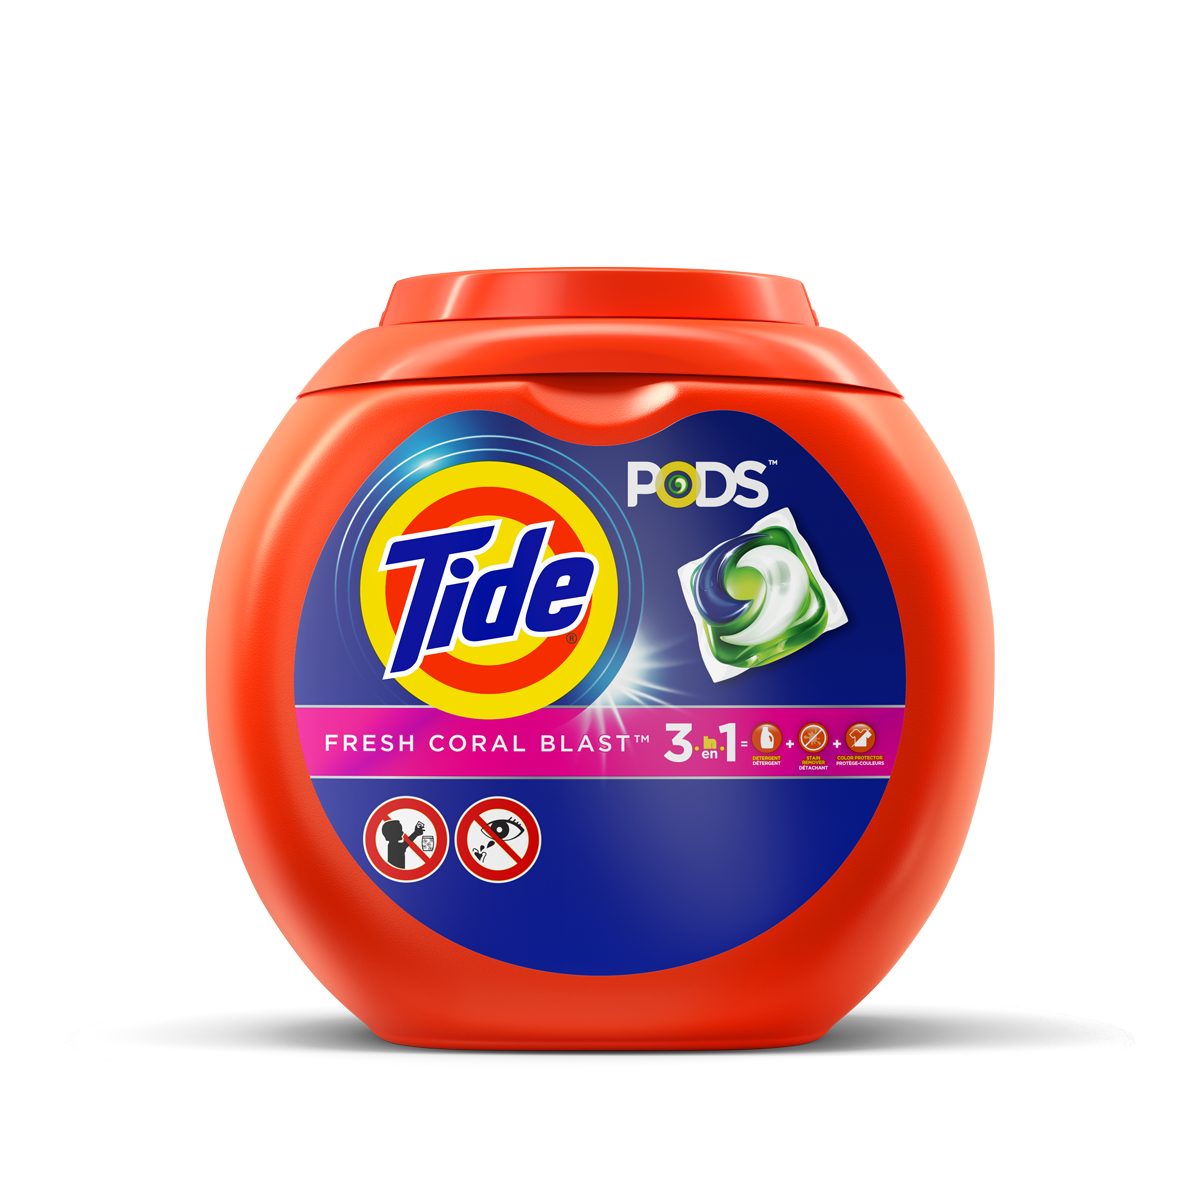 Tide PODS Free & Gentle Liquid Laundry, 96 ct - Pick 'n Save